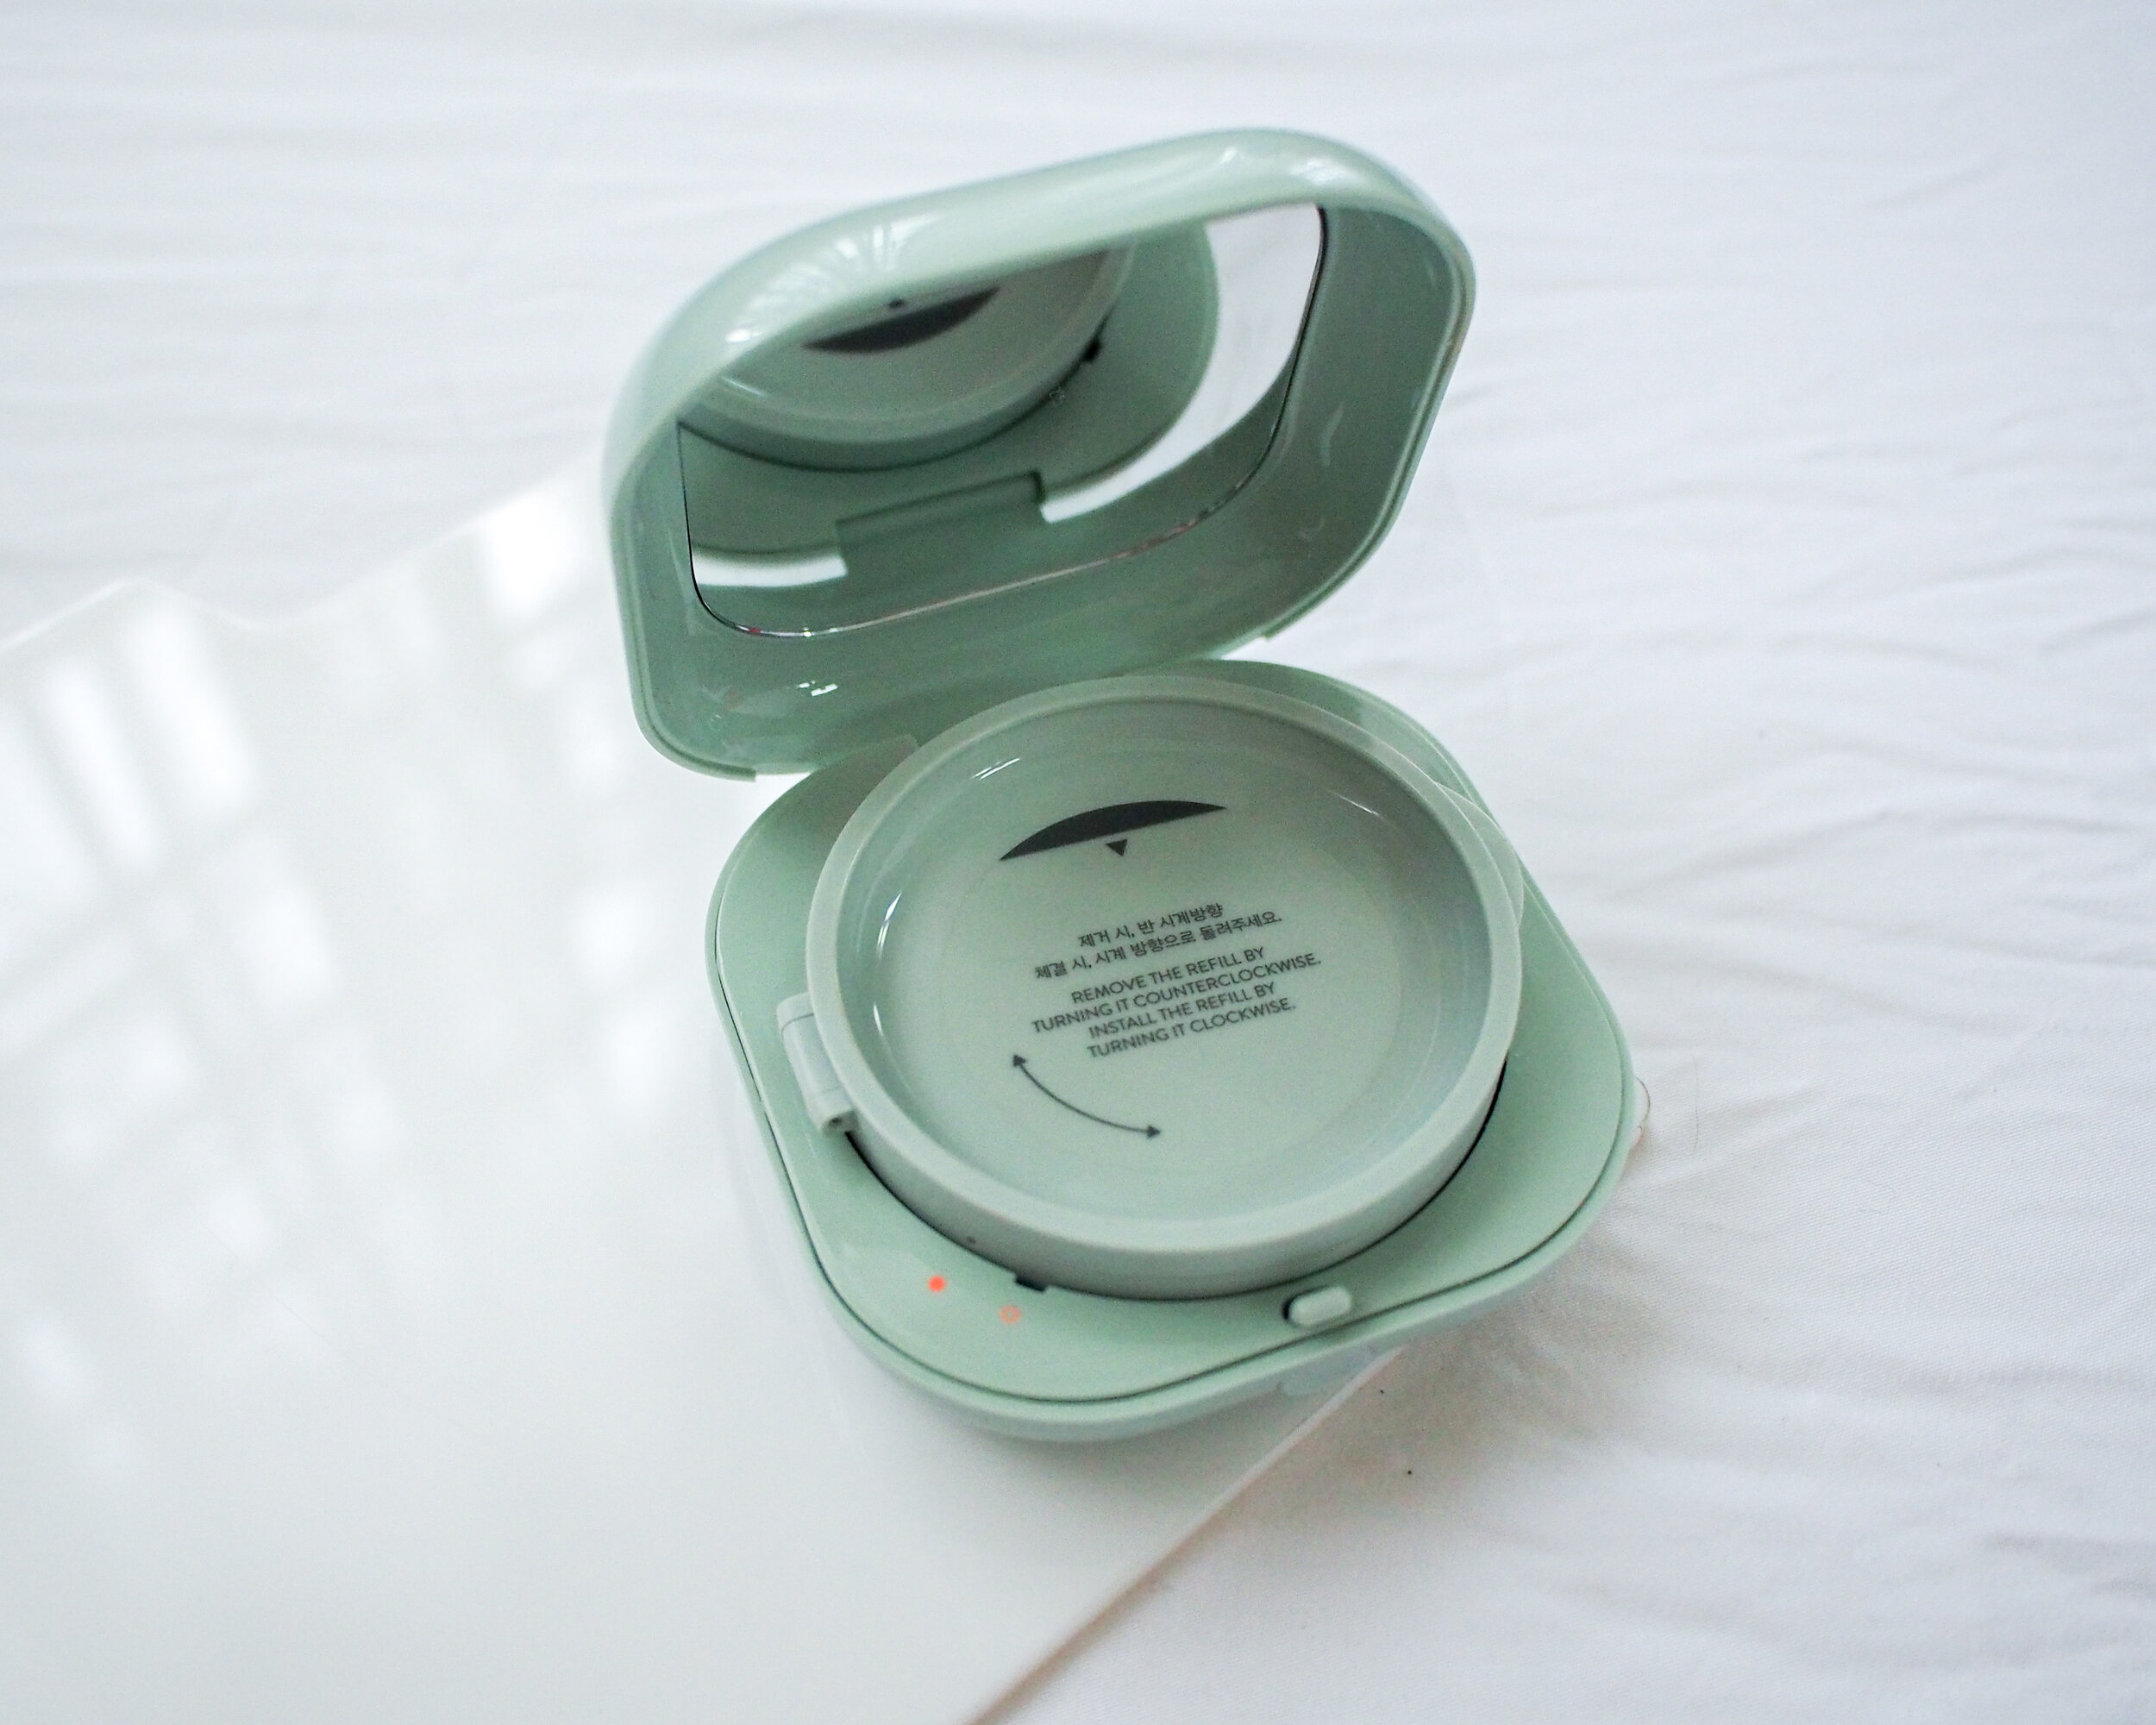 Is the Laneige Neo Cushion Matte really mask-proof? — Project Vanity